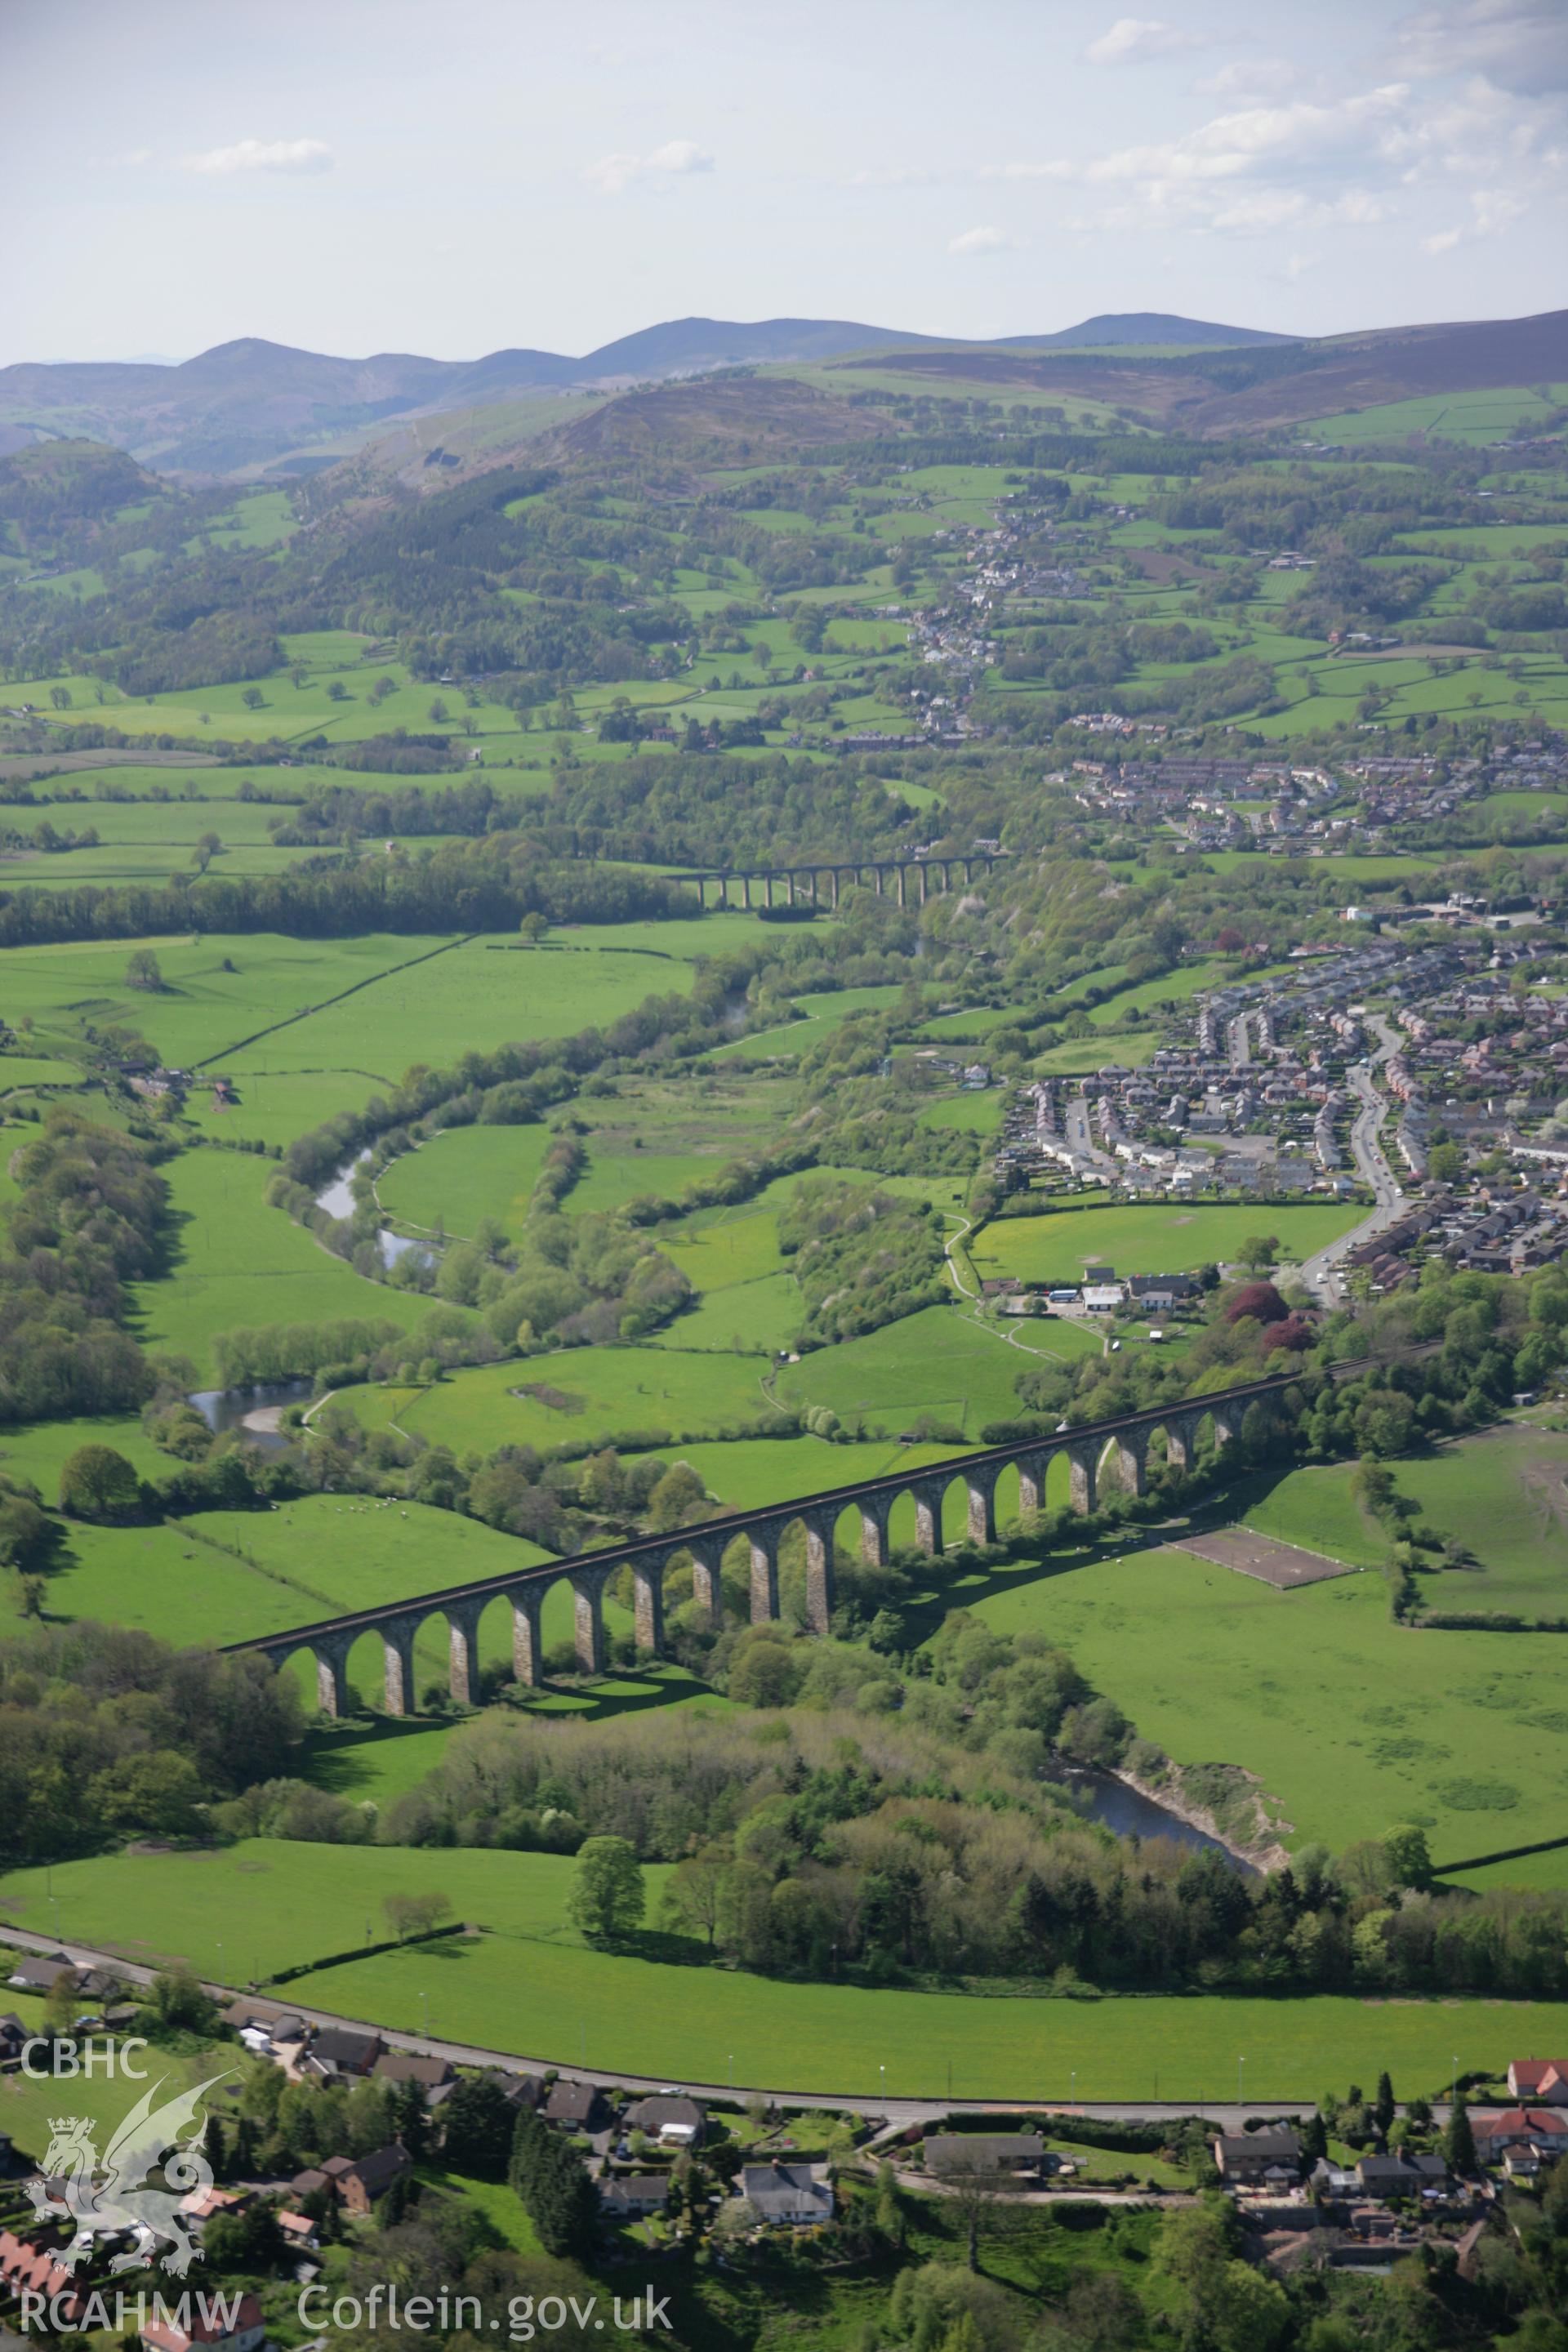 RCAHMW digital colour oblique photograph of Cefn Bychan Viaduct viewed from the south-east. Taken on 05/05/2006 by T.G. Driver.